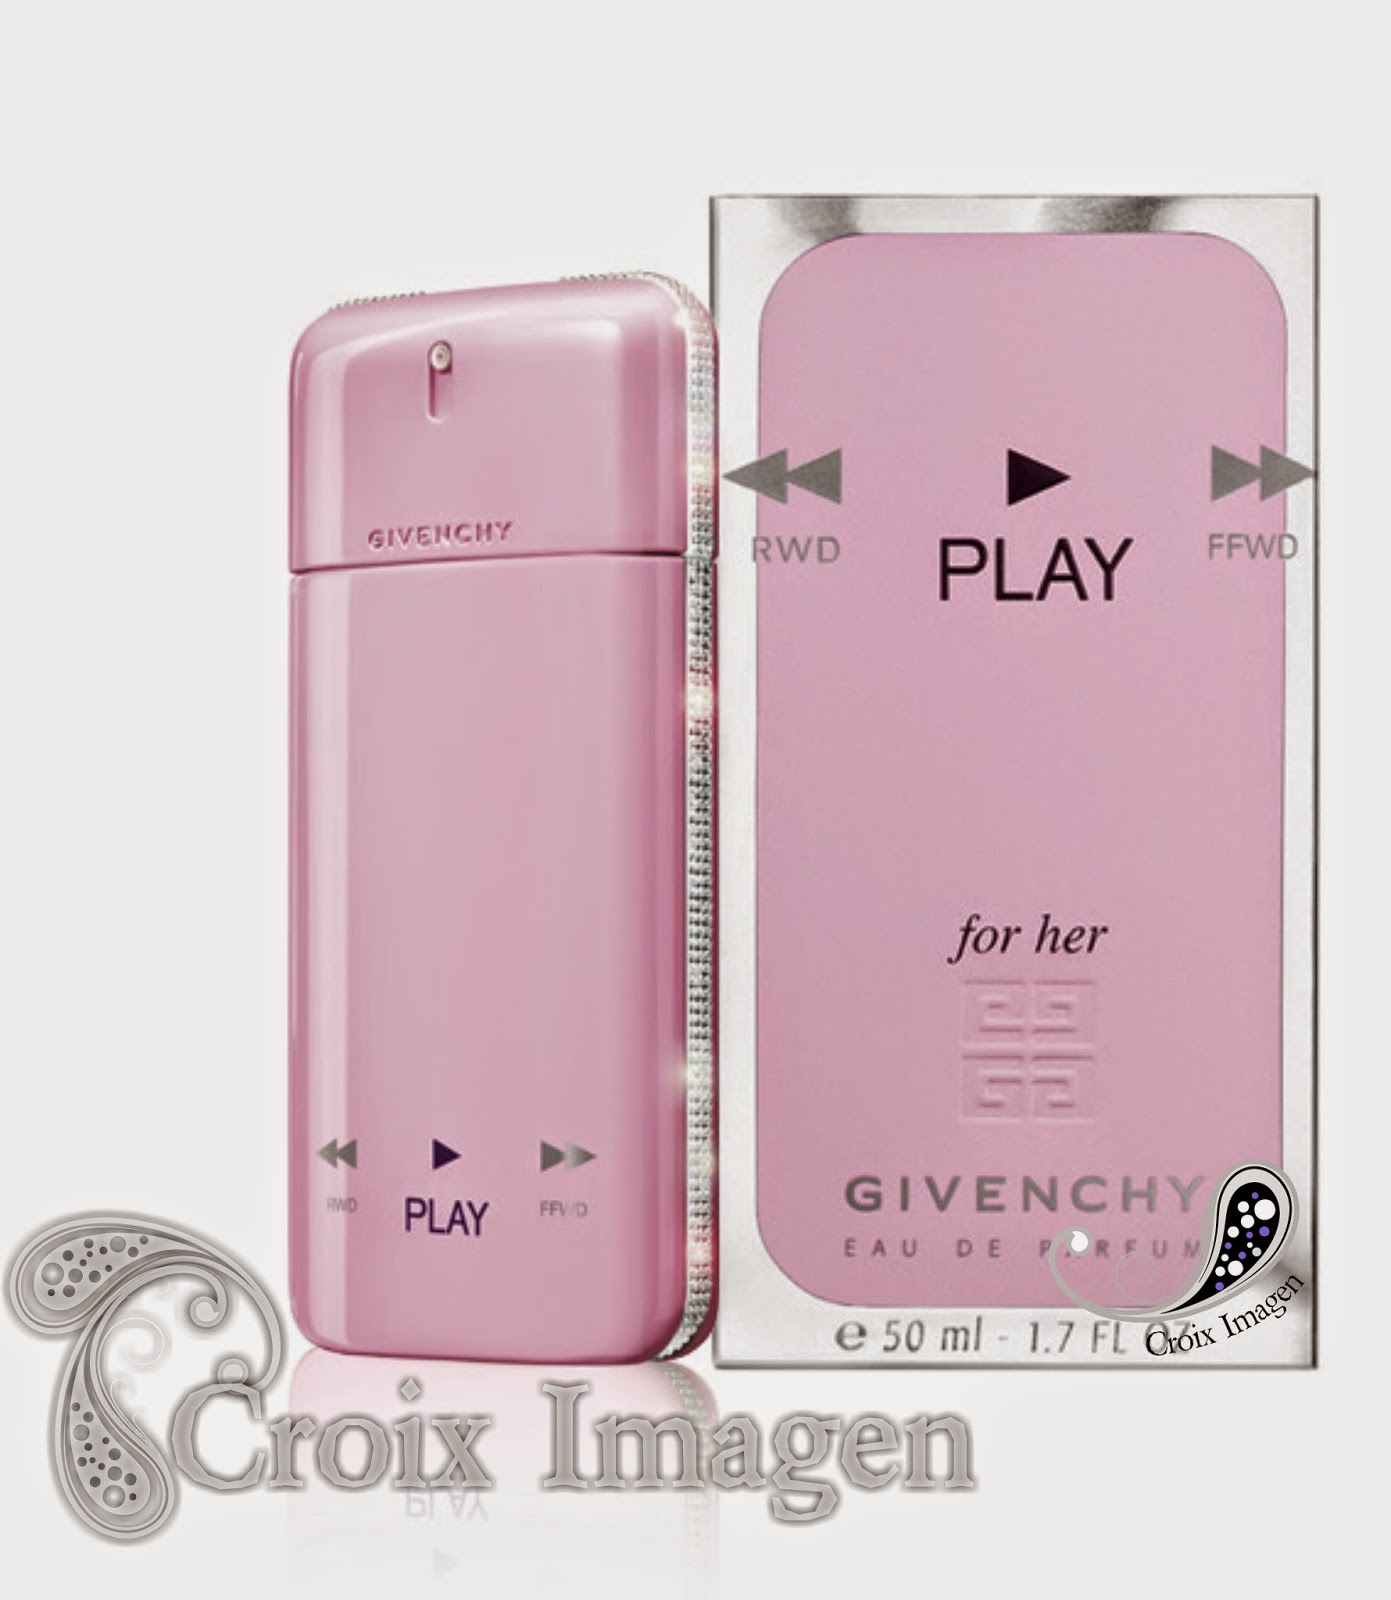 Croix Imagen: Fragancias – Play For Her – Givenchy